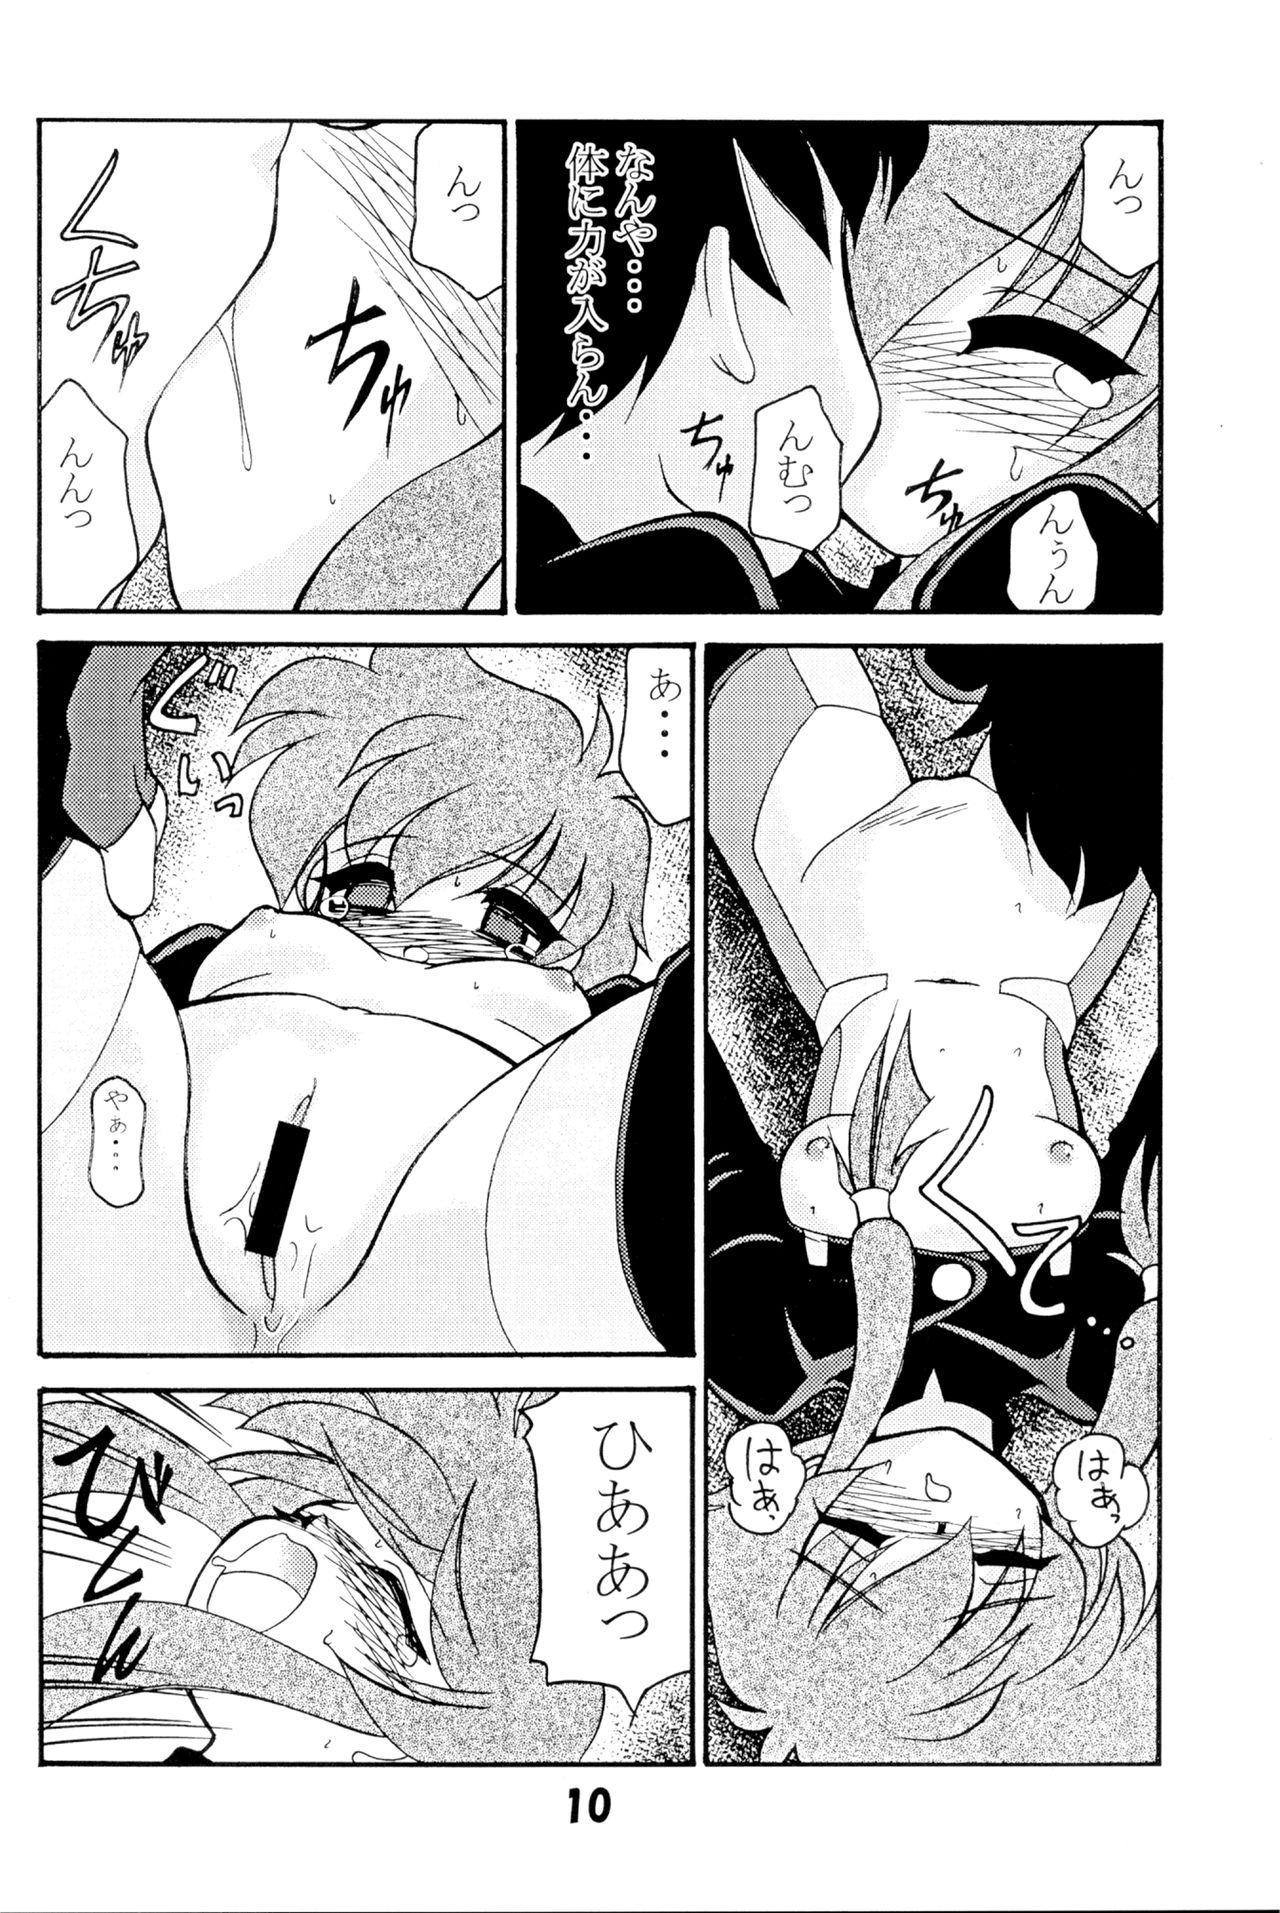 Teen Blowjob VERSUS - Magic knight rayearth Angelic layer Real Couple - Page 9